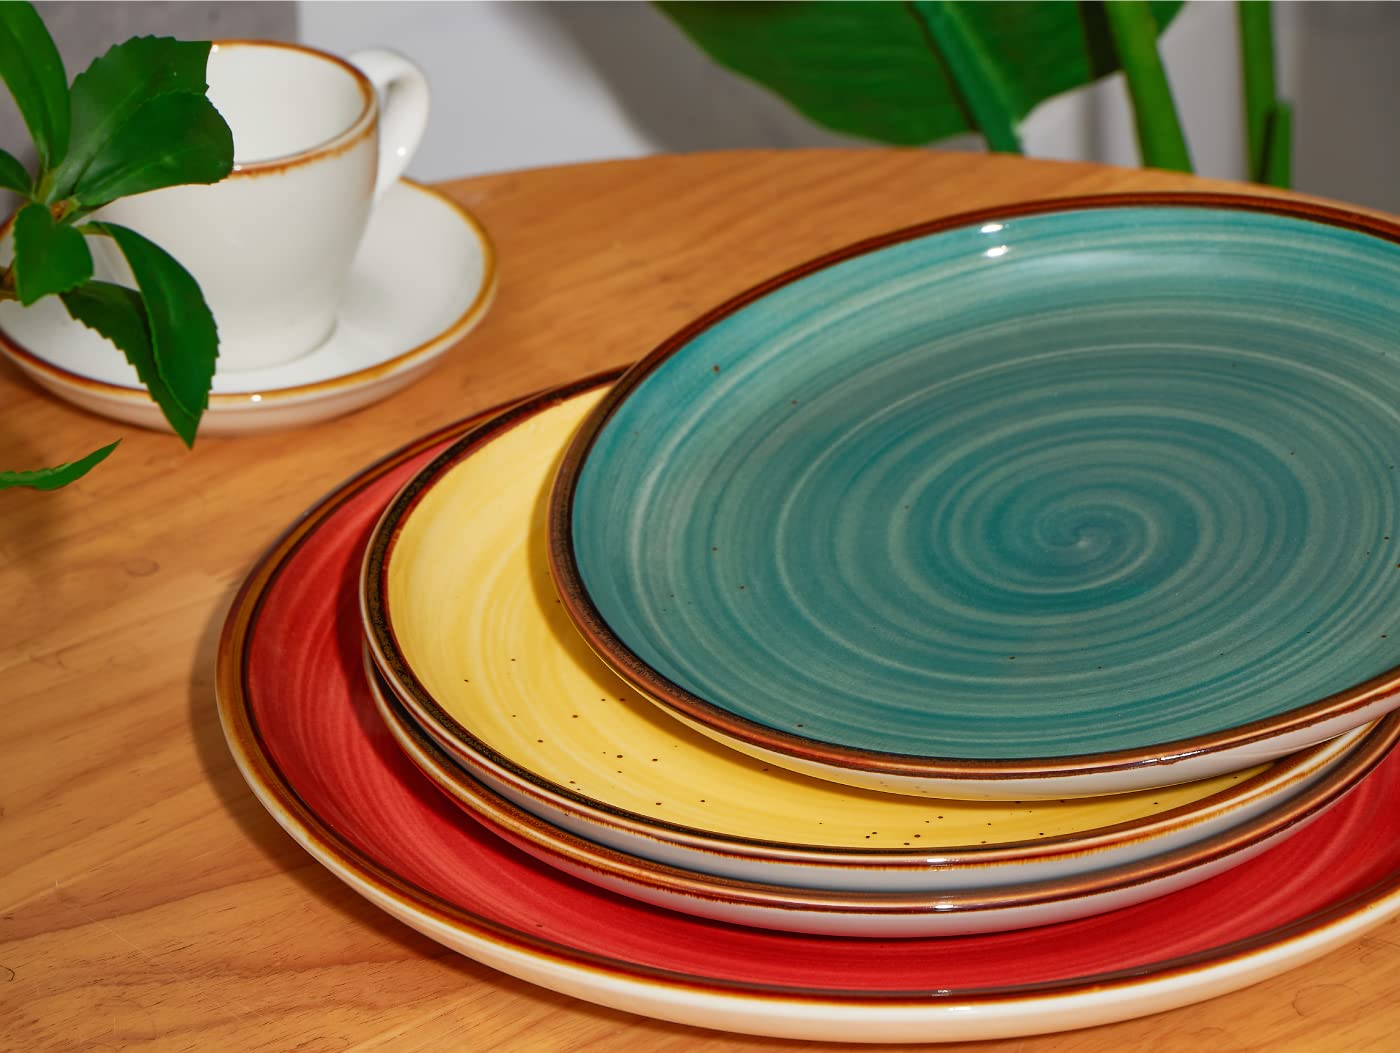 ONEMORE 10.5 inch Dinner Plates and 30 oz Pasta Bowls Bundle - Microwave, Oven and Dishwasher Safe - Assorted Color